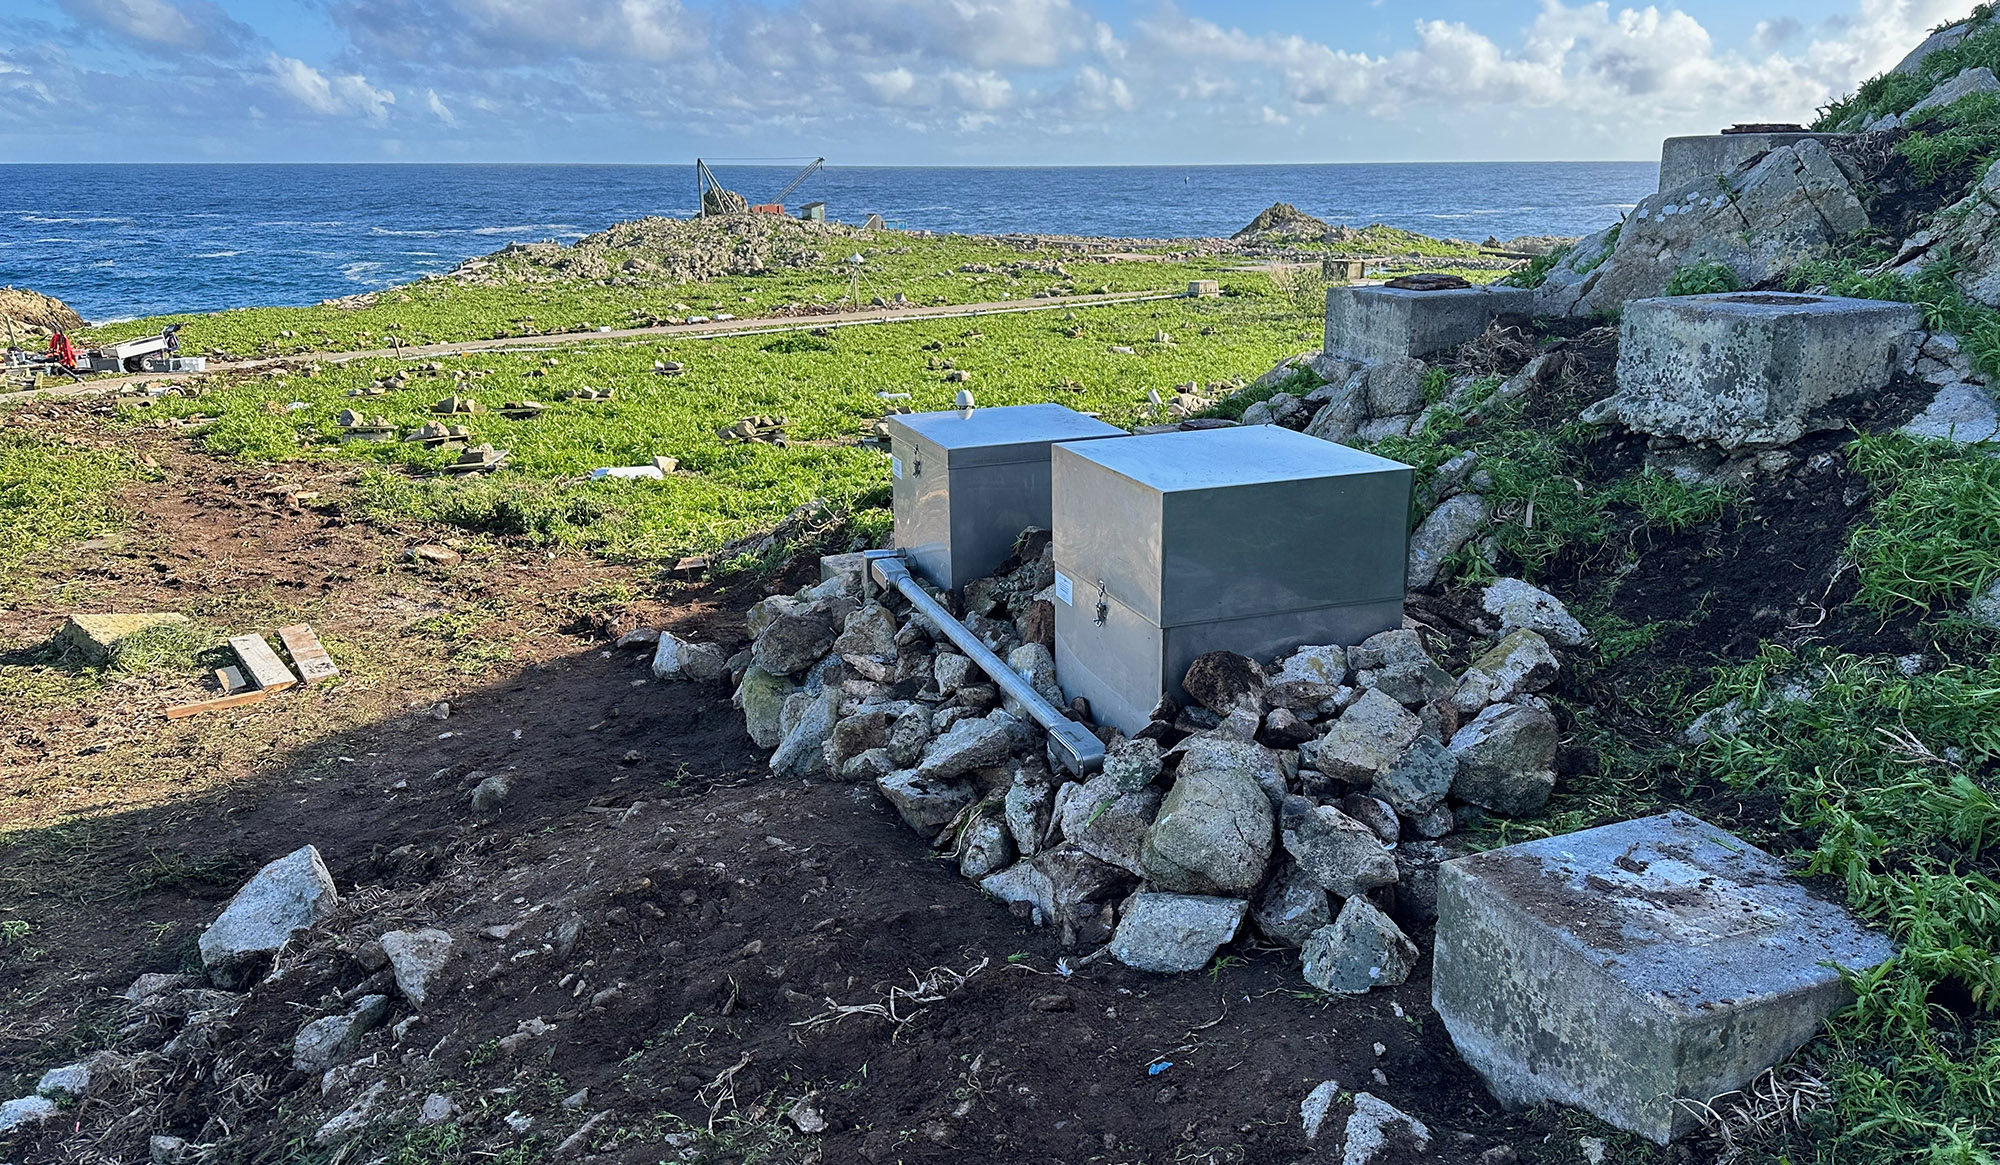 2 stainless steel boxes sit among rocks on a hillside overlooking the ocean